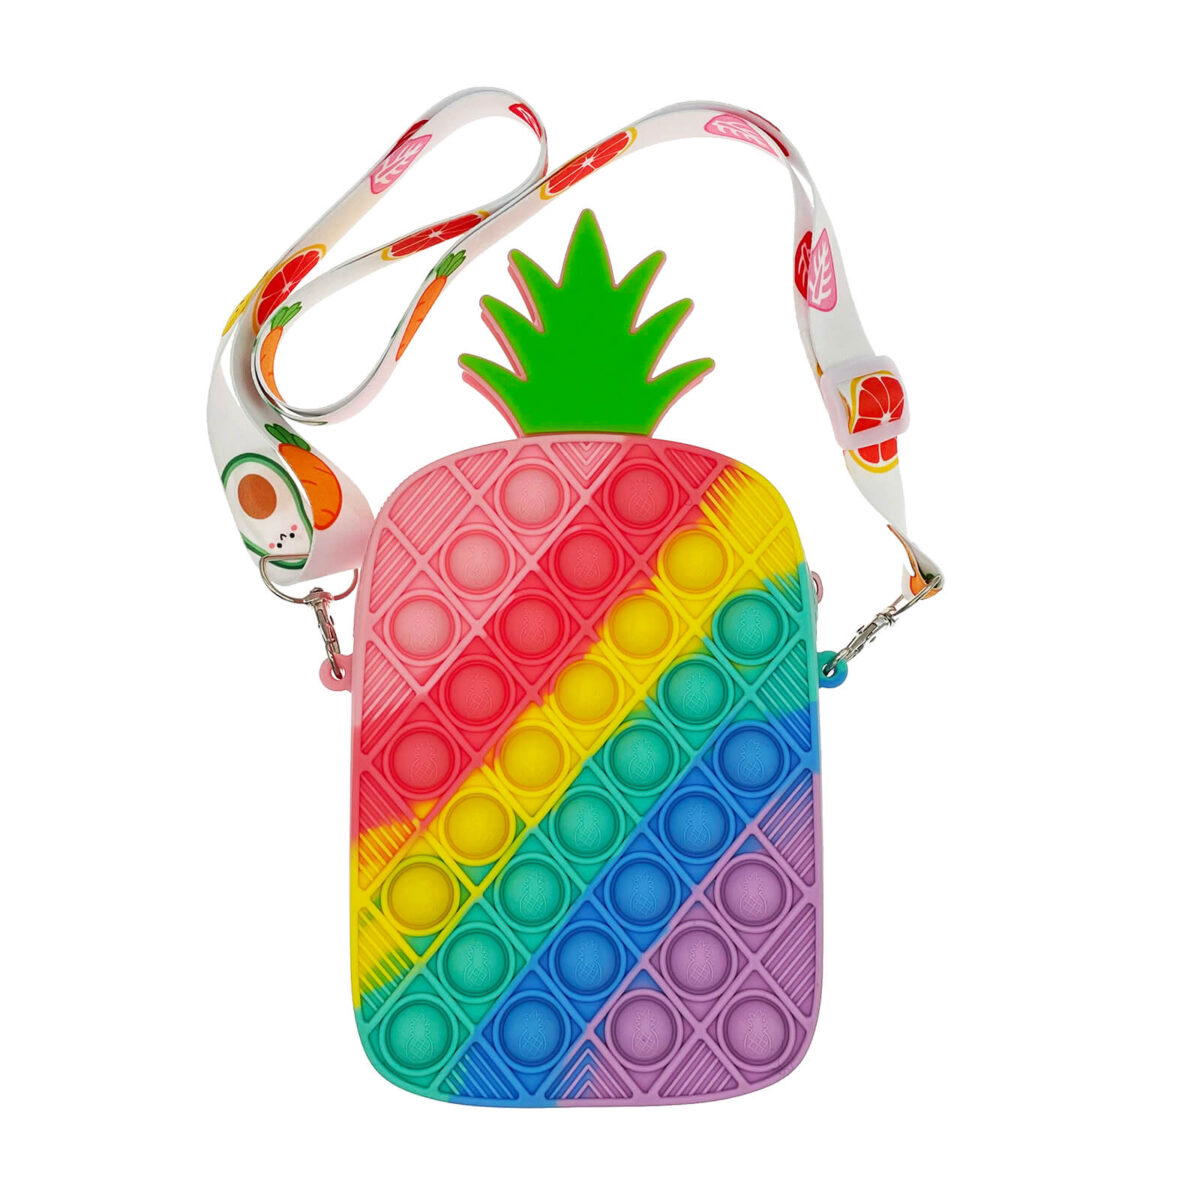 Big Pineapple Pop Its Purse Fidgret Purse Toy With Strap